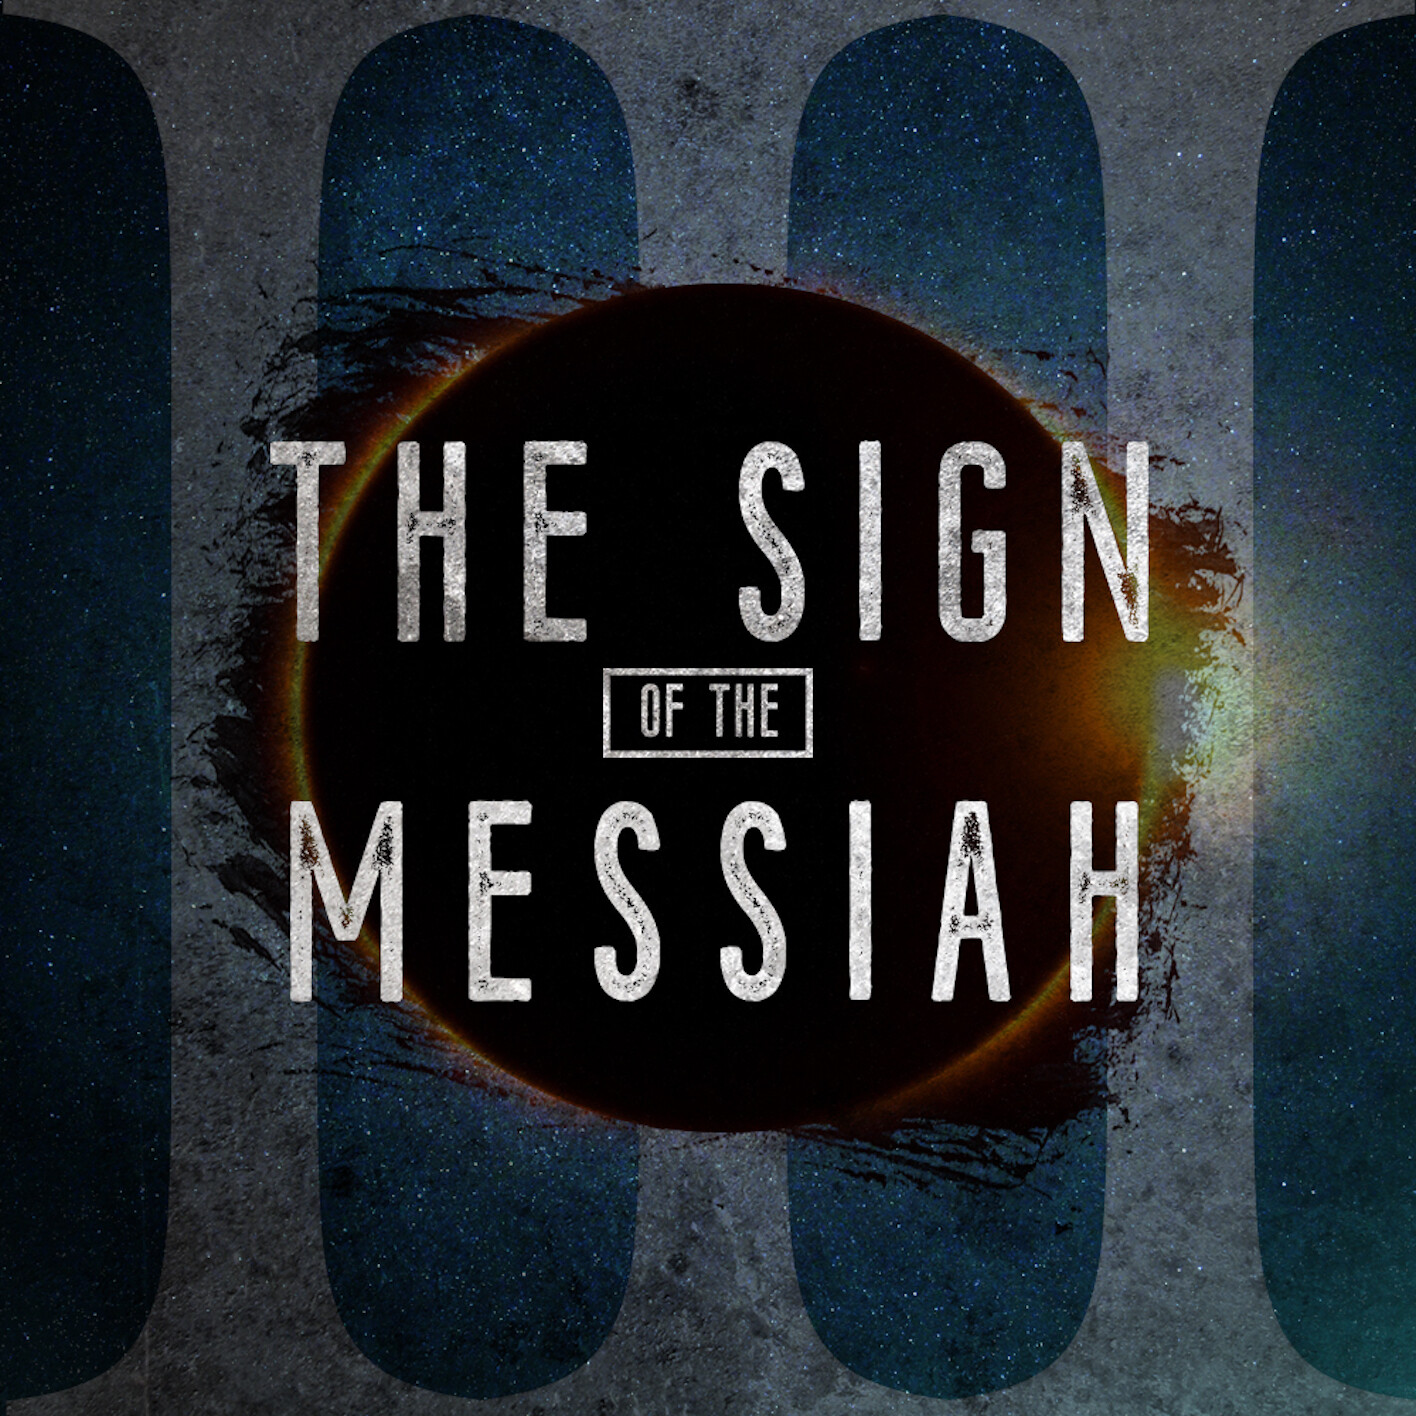 Song - The Sign of the Messiah